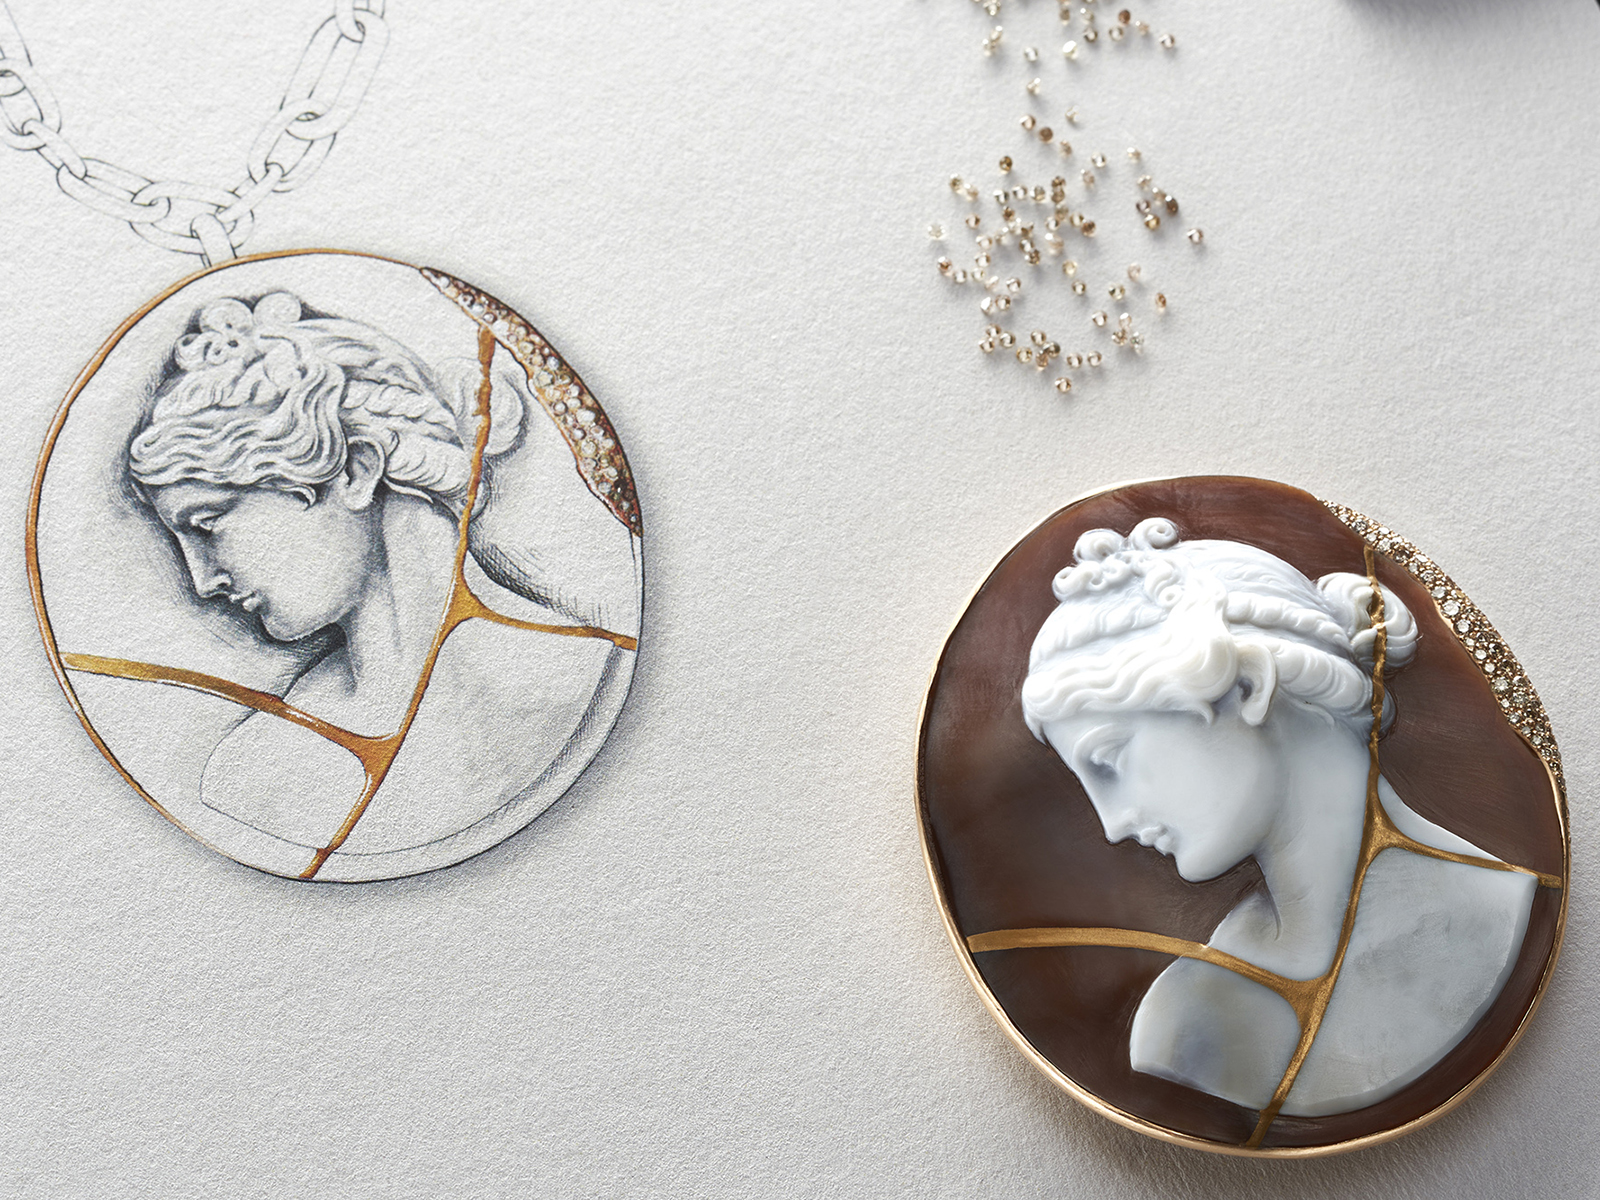 Sketch and cameo brooch being planned and created